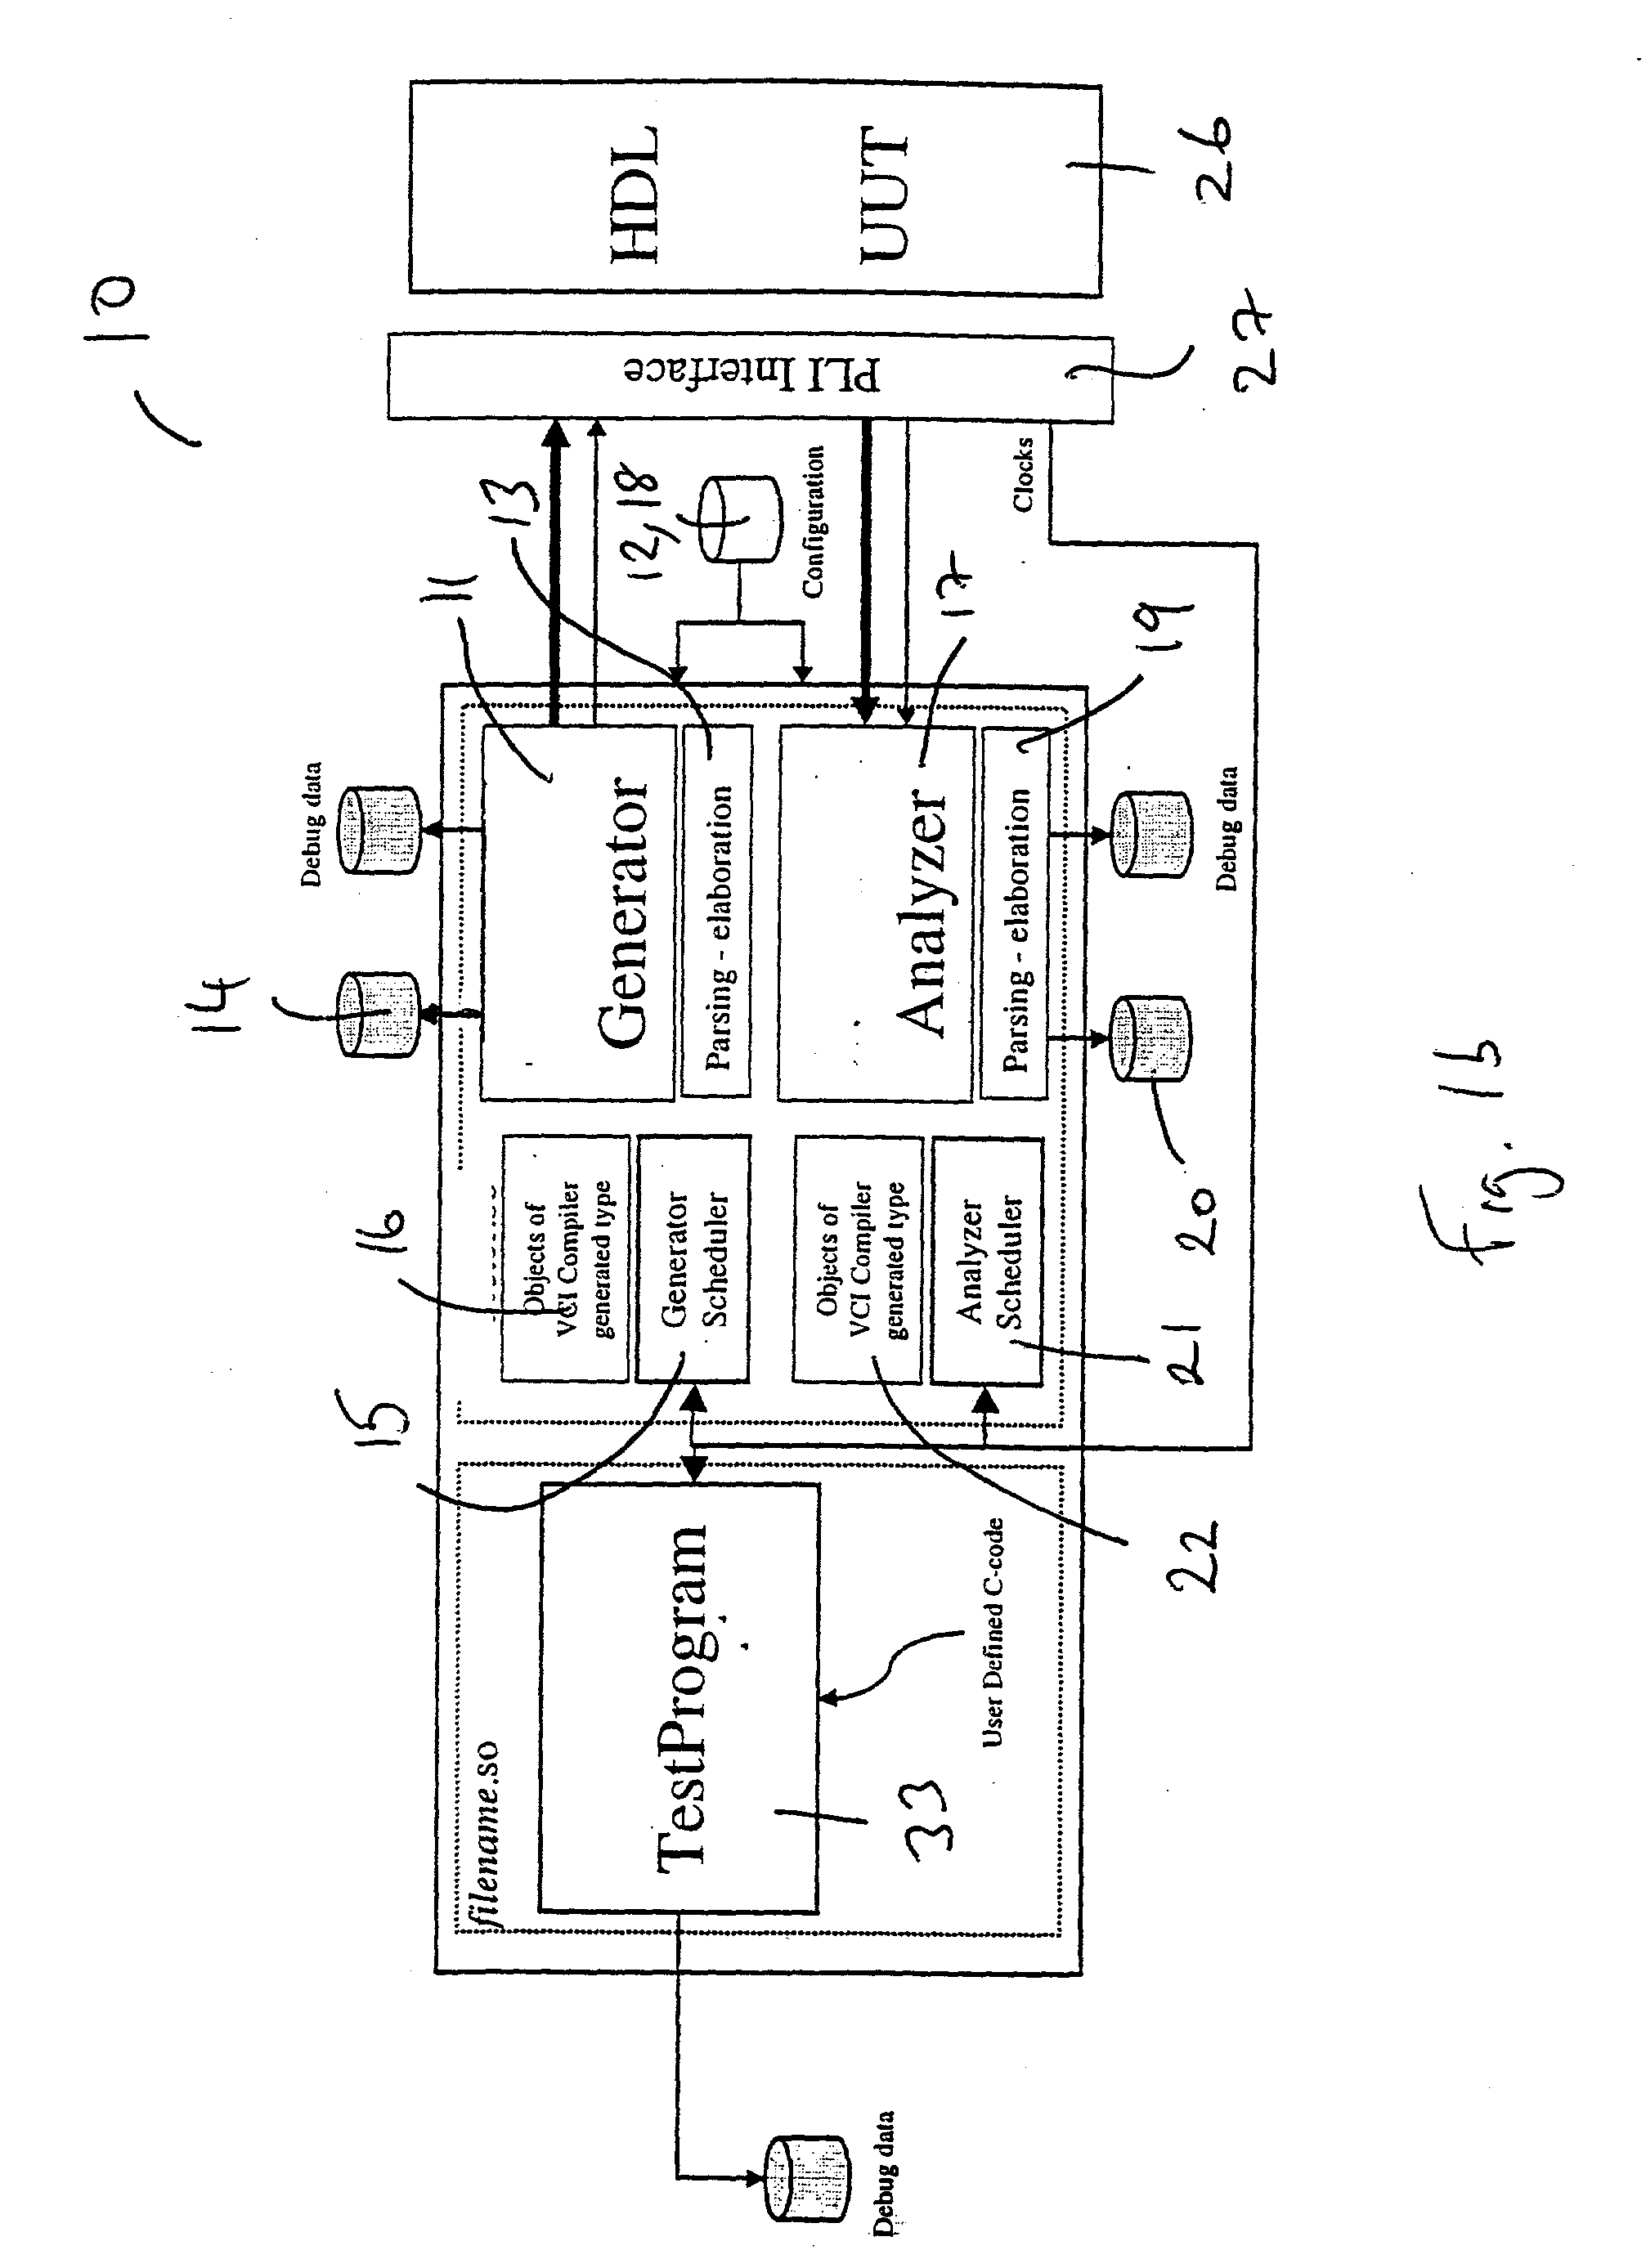 Computer based verification system for telecommunication devices and method of operating the same